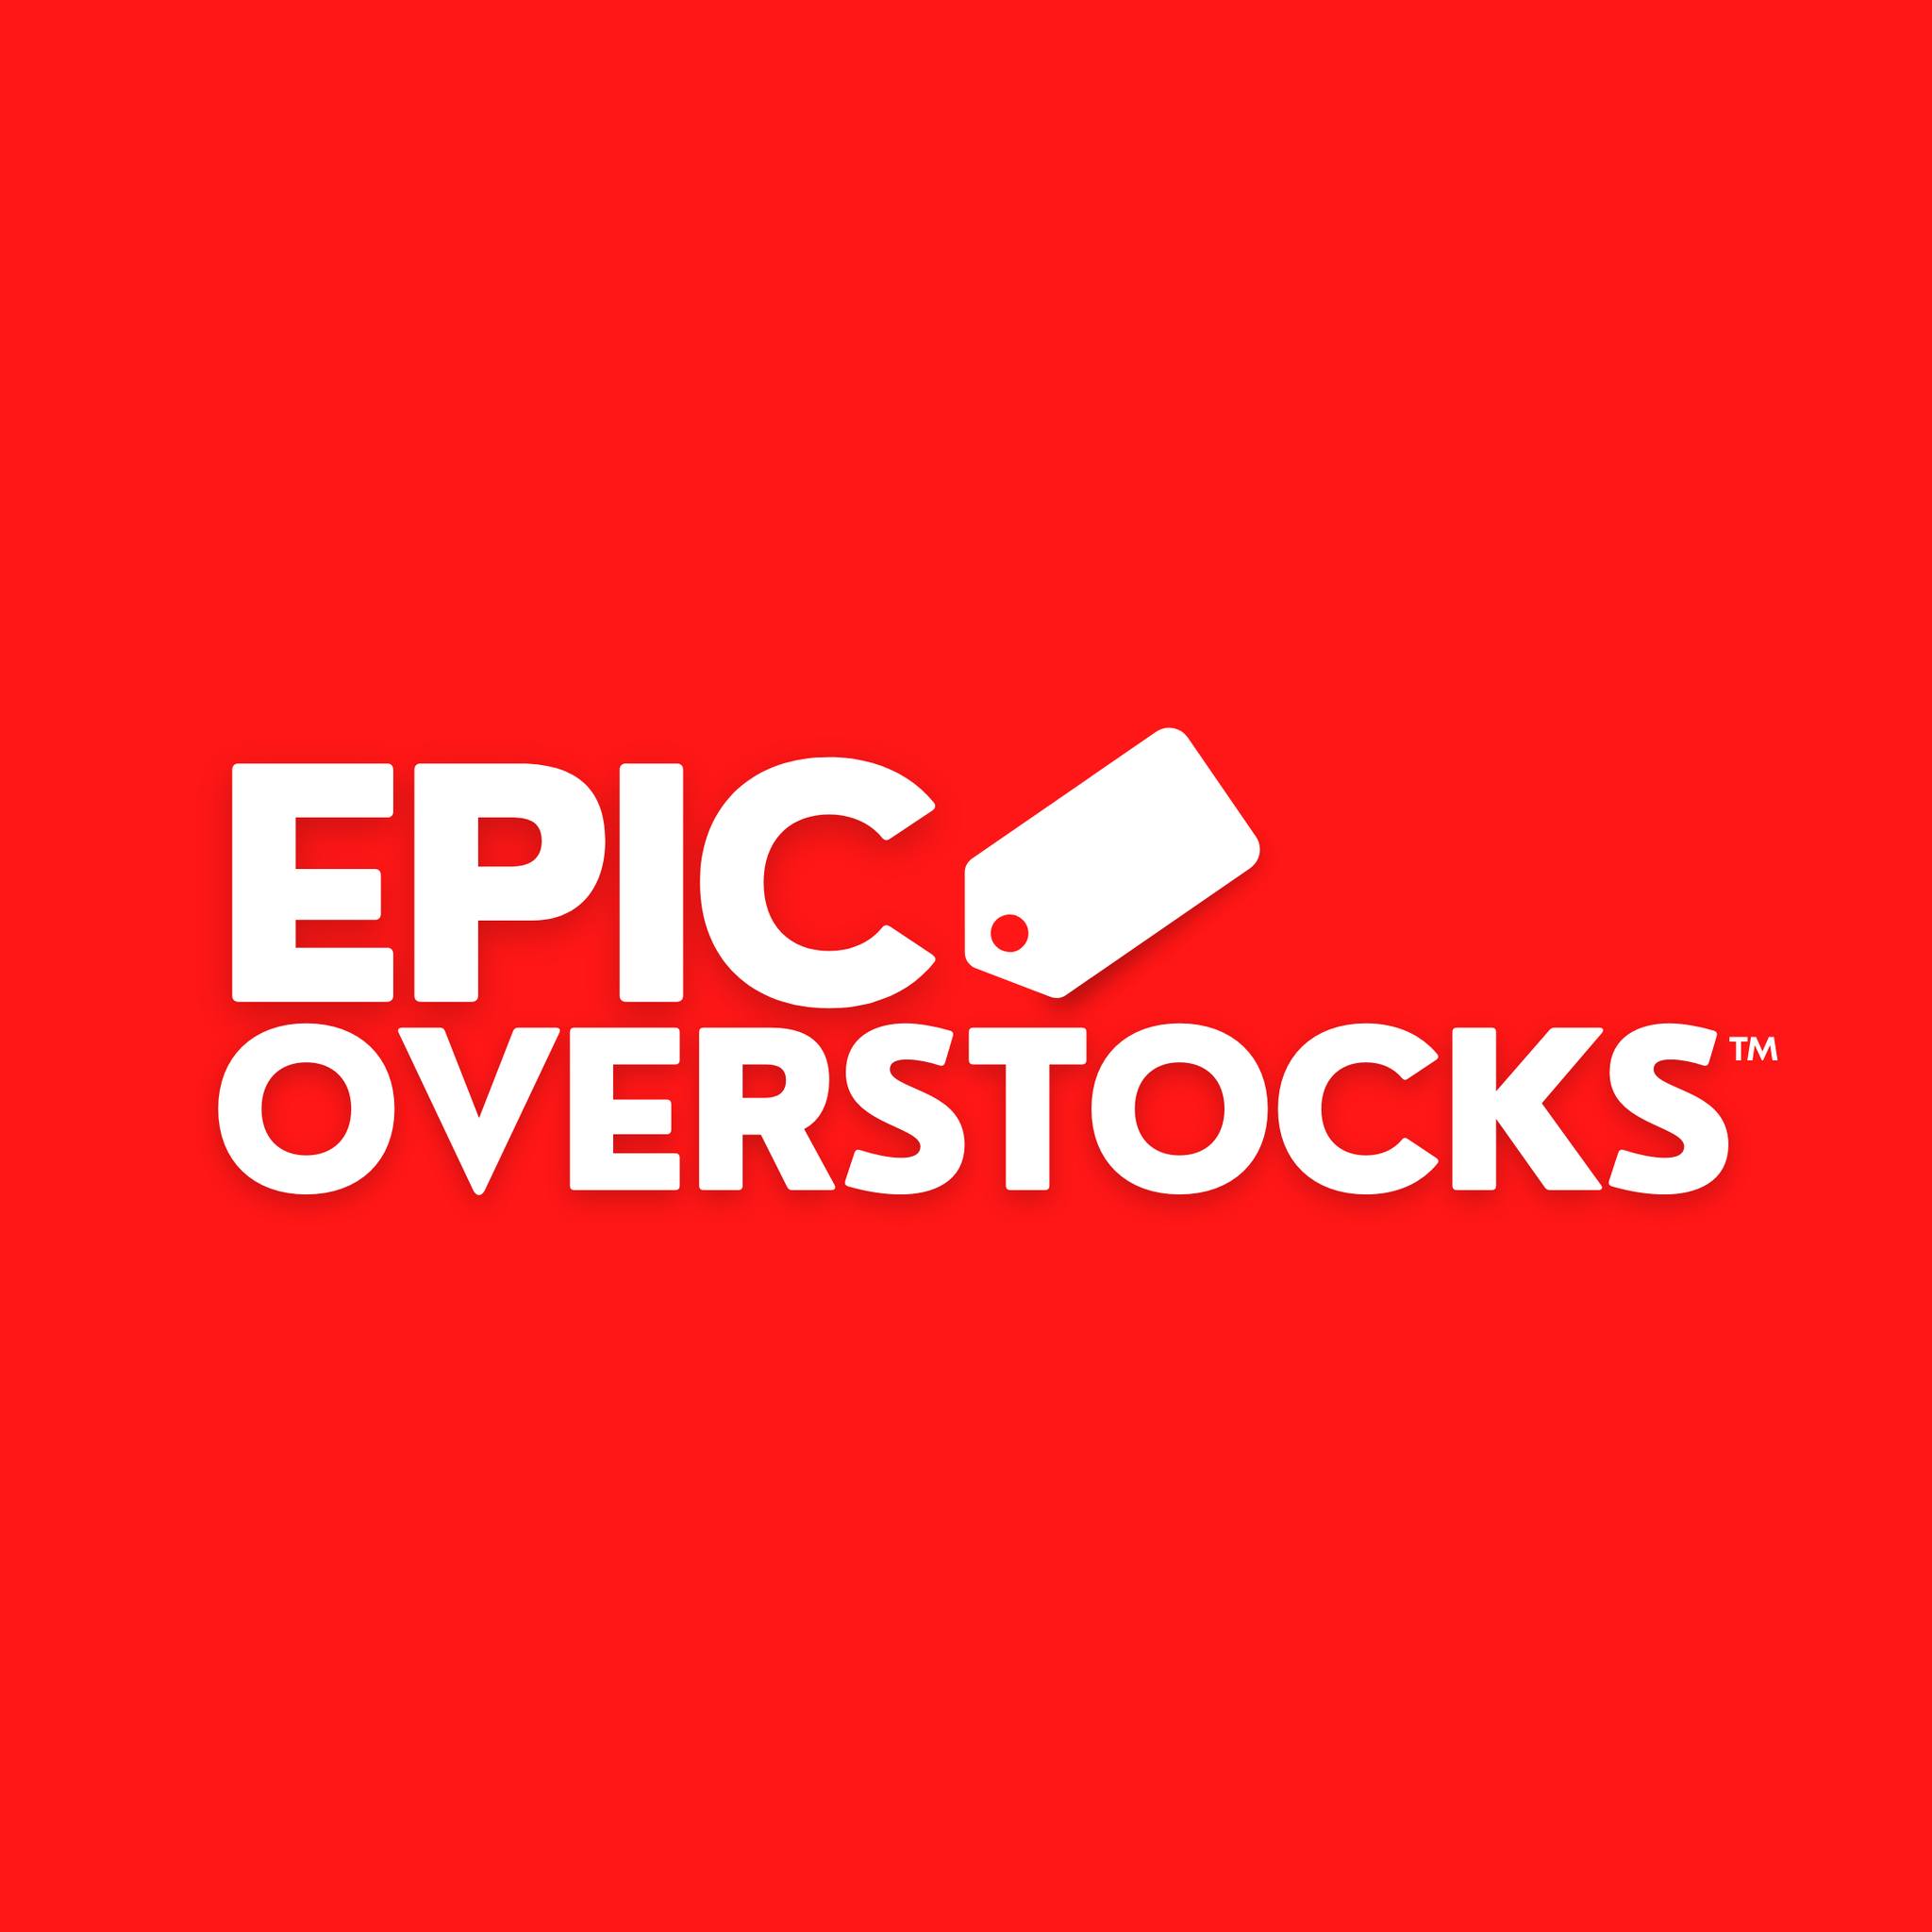  A price tag on a red background with the text "EPIC OVERSTOCKS" in white.